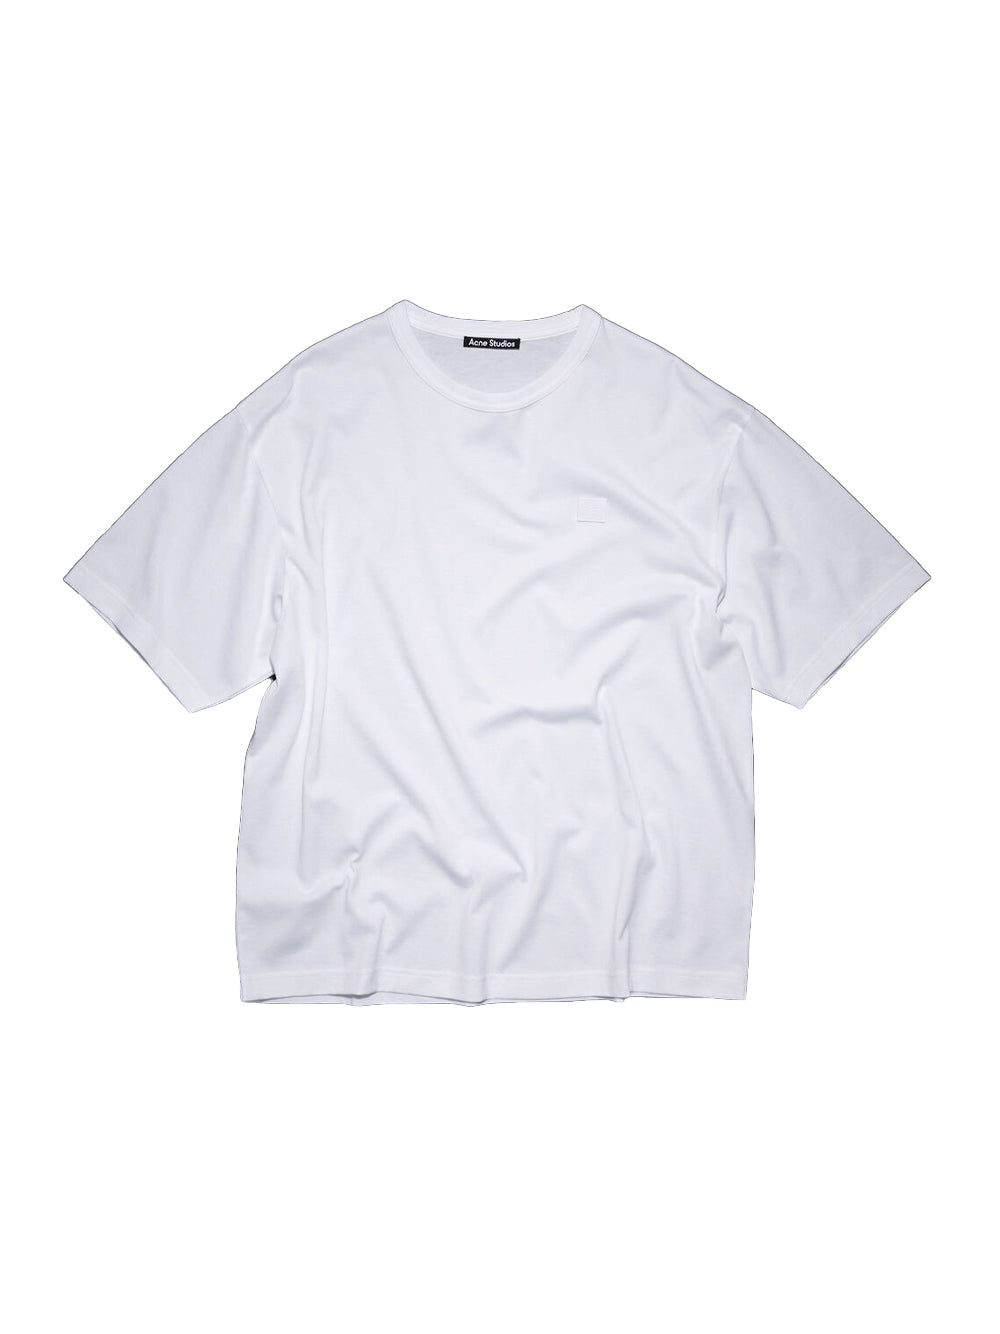 Relaxed Fit Crew Neck T-Shirts (Optic White)